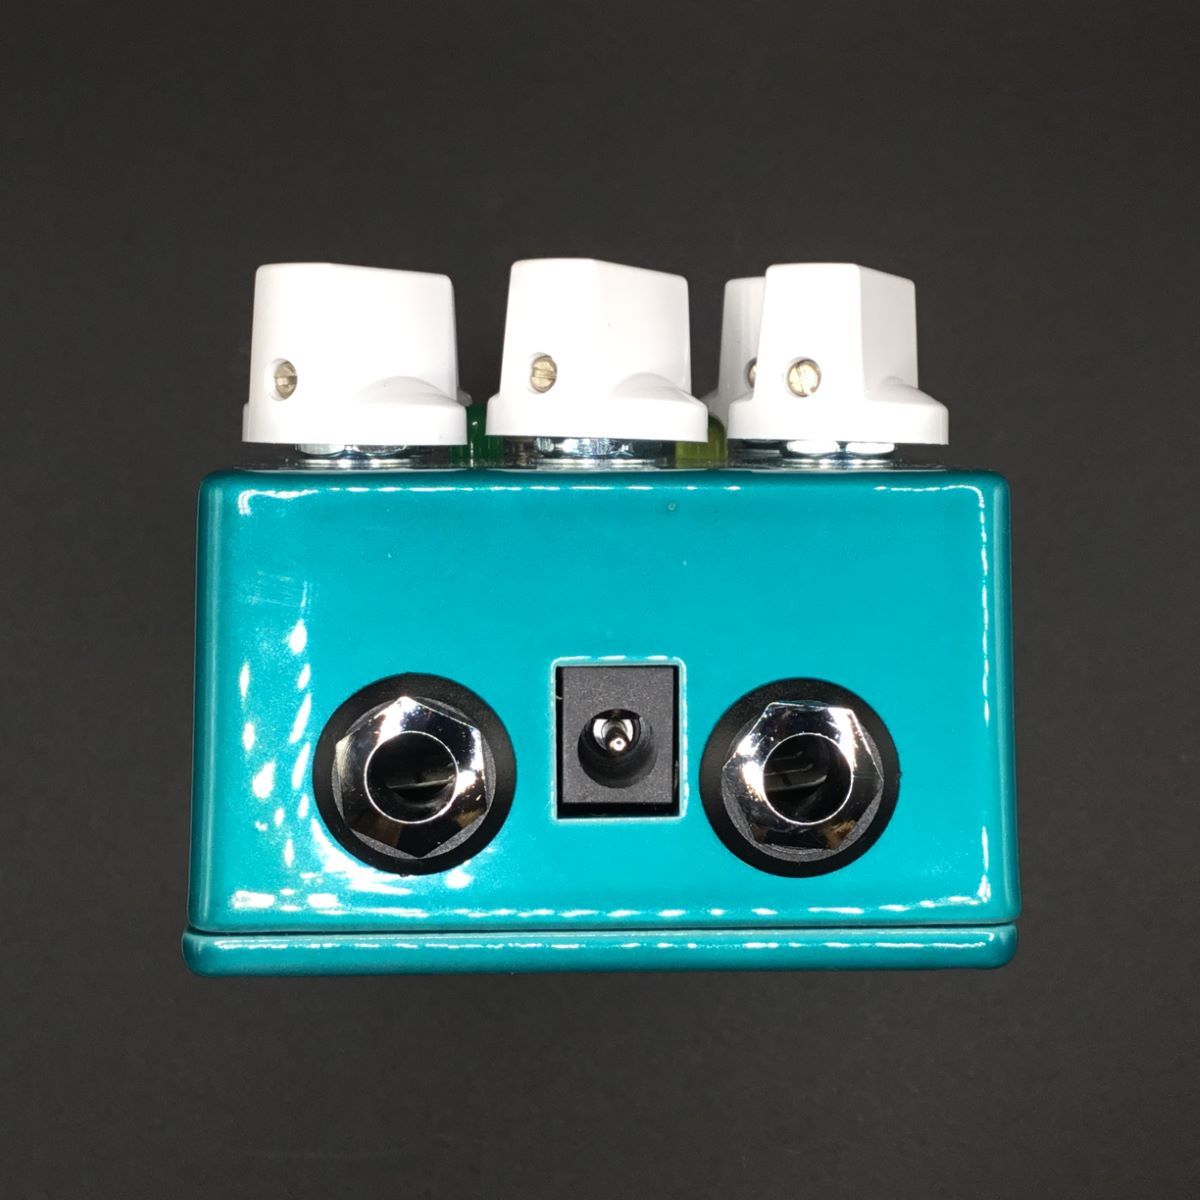 Wampler Pedals Ethereal 【プレートリバーブ・ディレイ】（新品/送料 